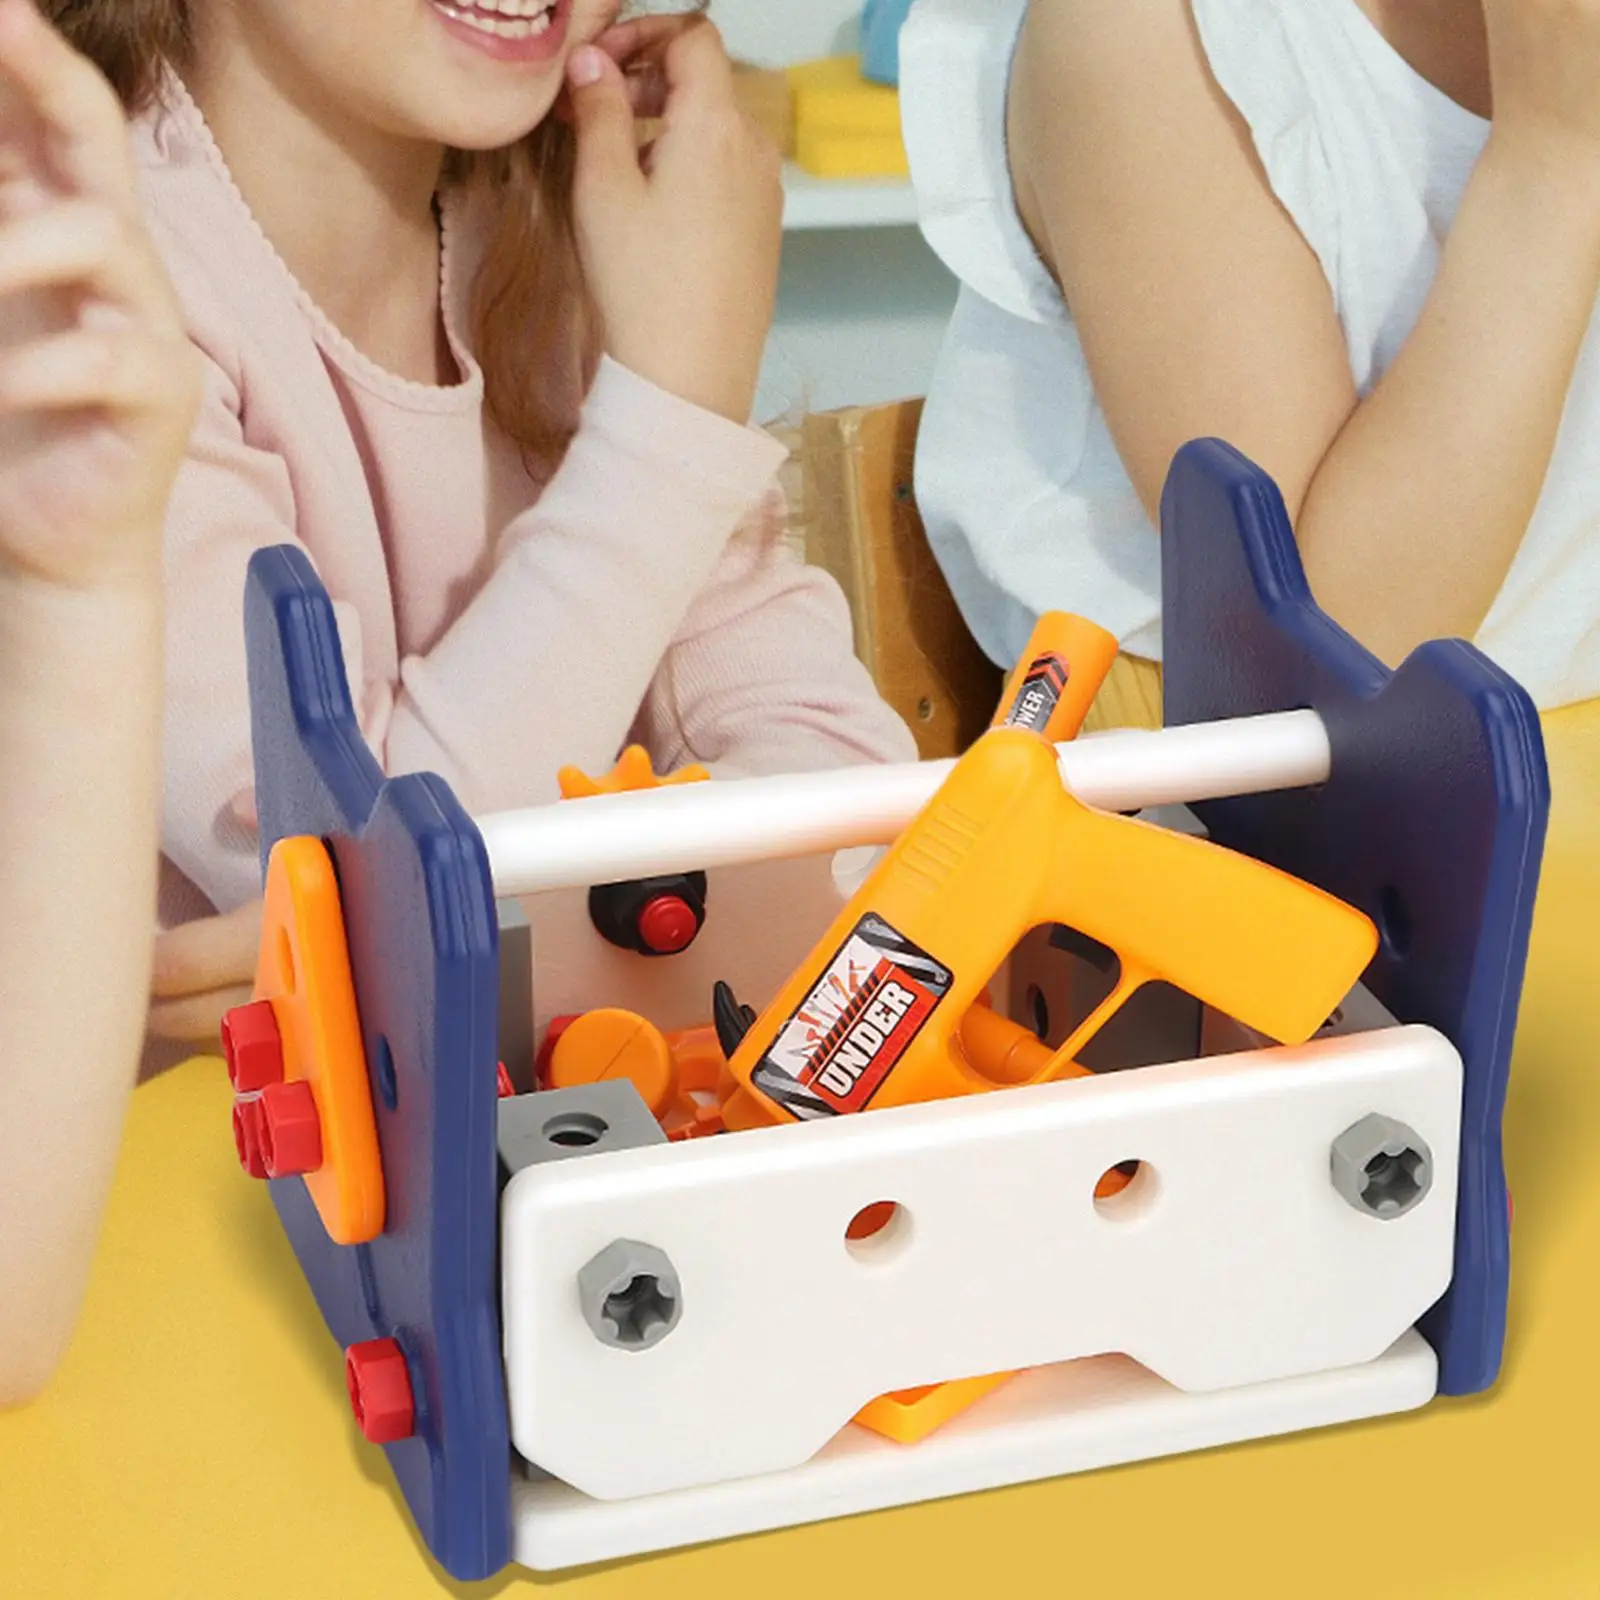 Toolbox Kids Toy Set Develops Fine Motor Skills for Ages 3+ Years Old Kids